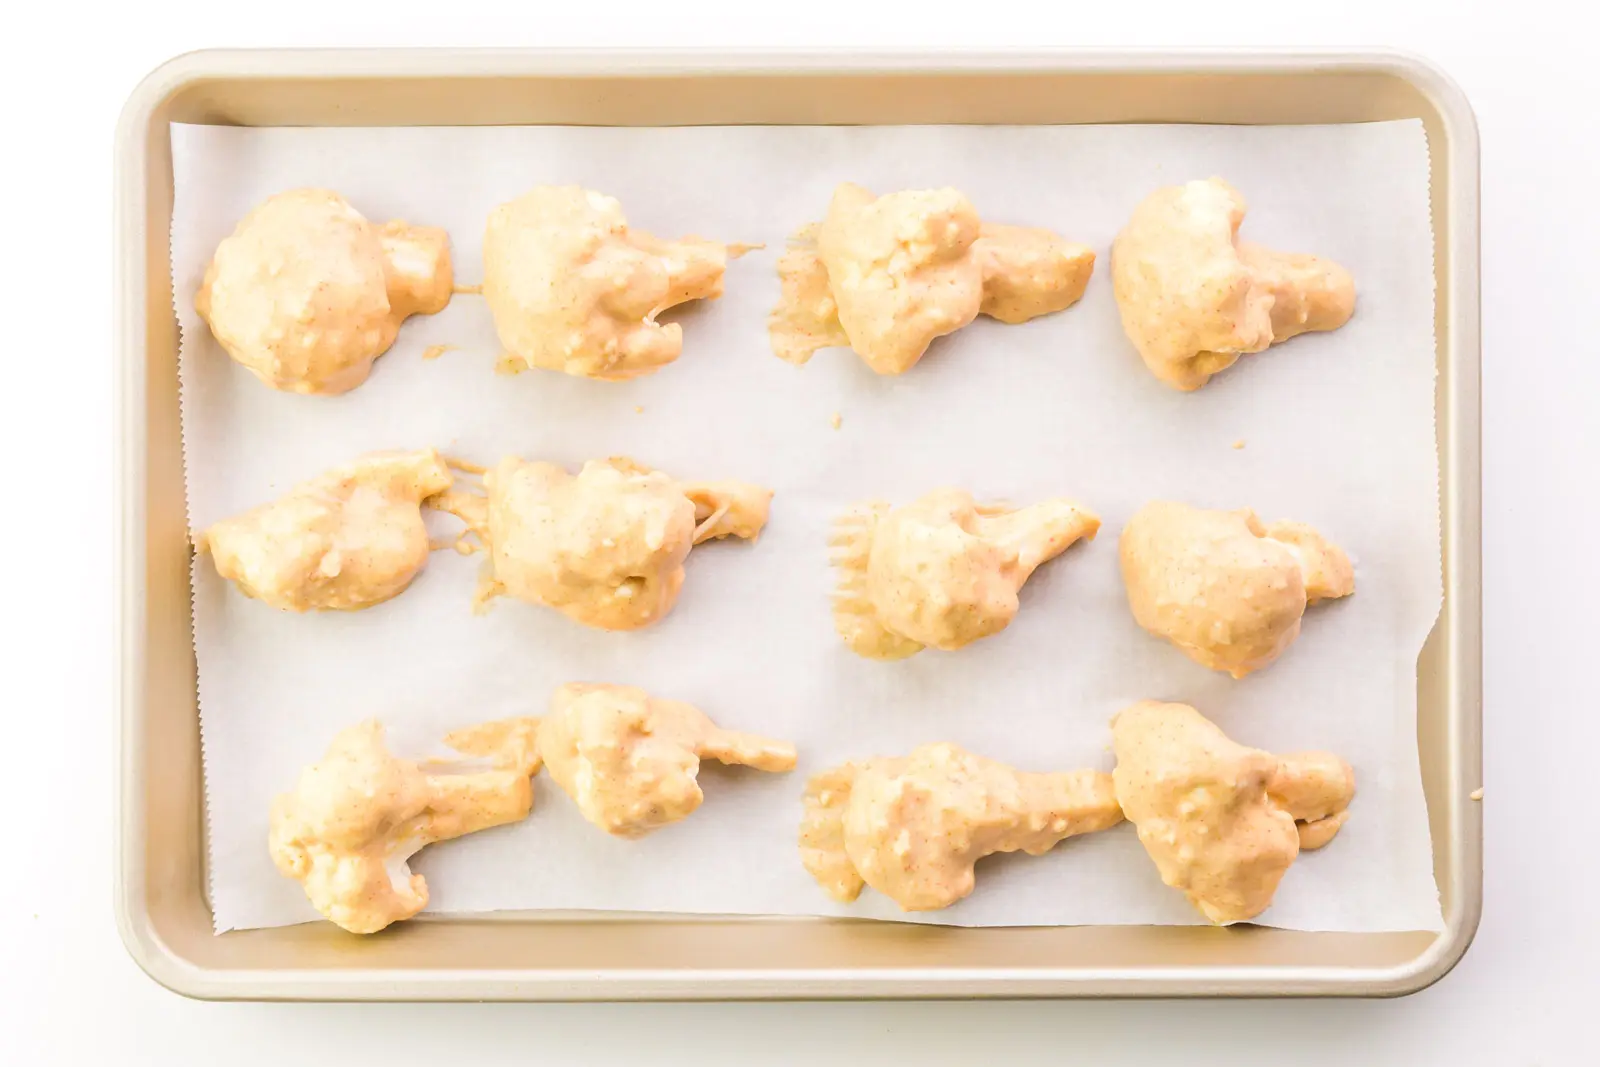 Cauliflower florets have been dipped in batter and baked until crispy. They're laid out in rows on a baking sheet lined with parchment paper.